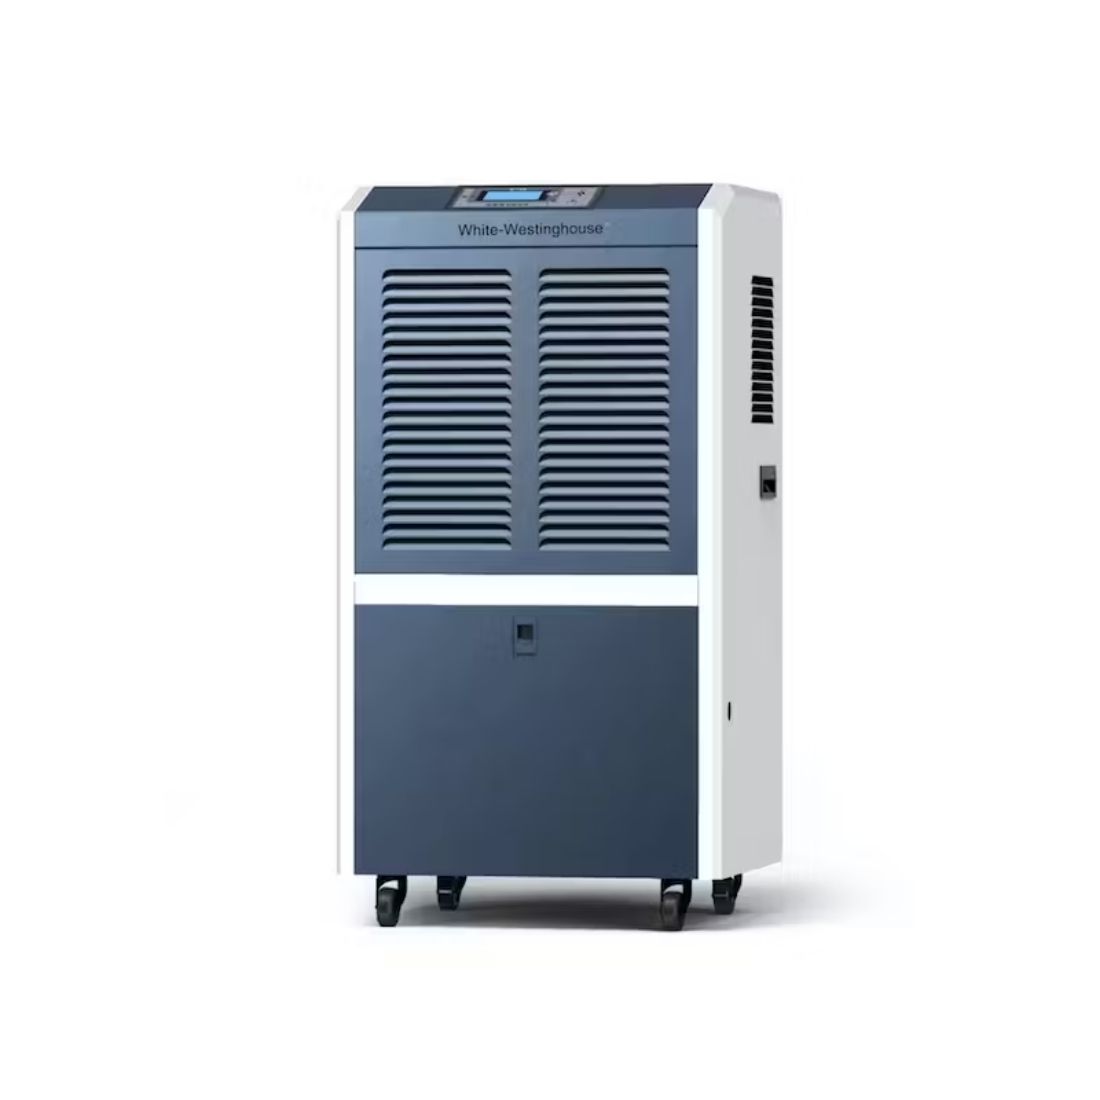 JET INDIA Introducing Jet India's Industrial Dehumidifier with Pump - Model WDE60P